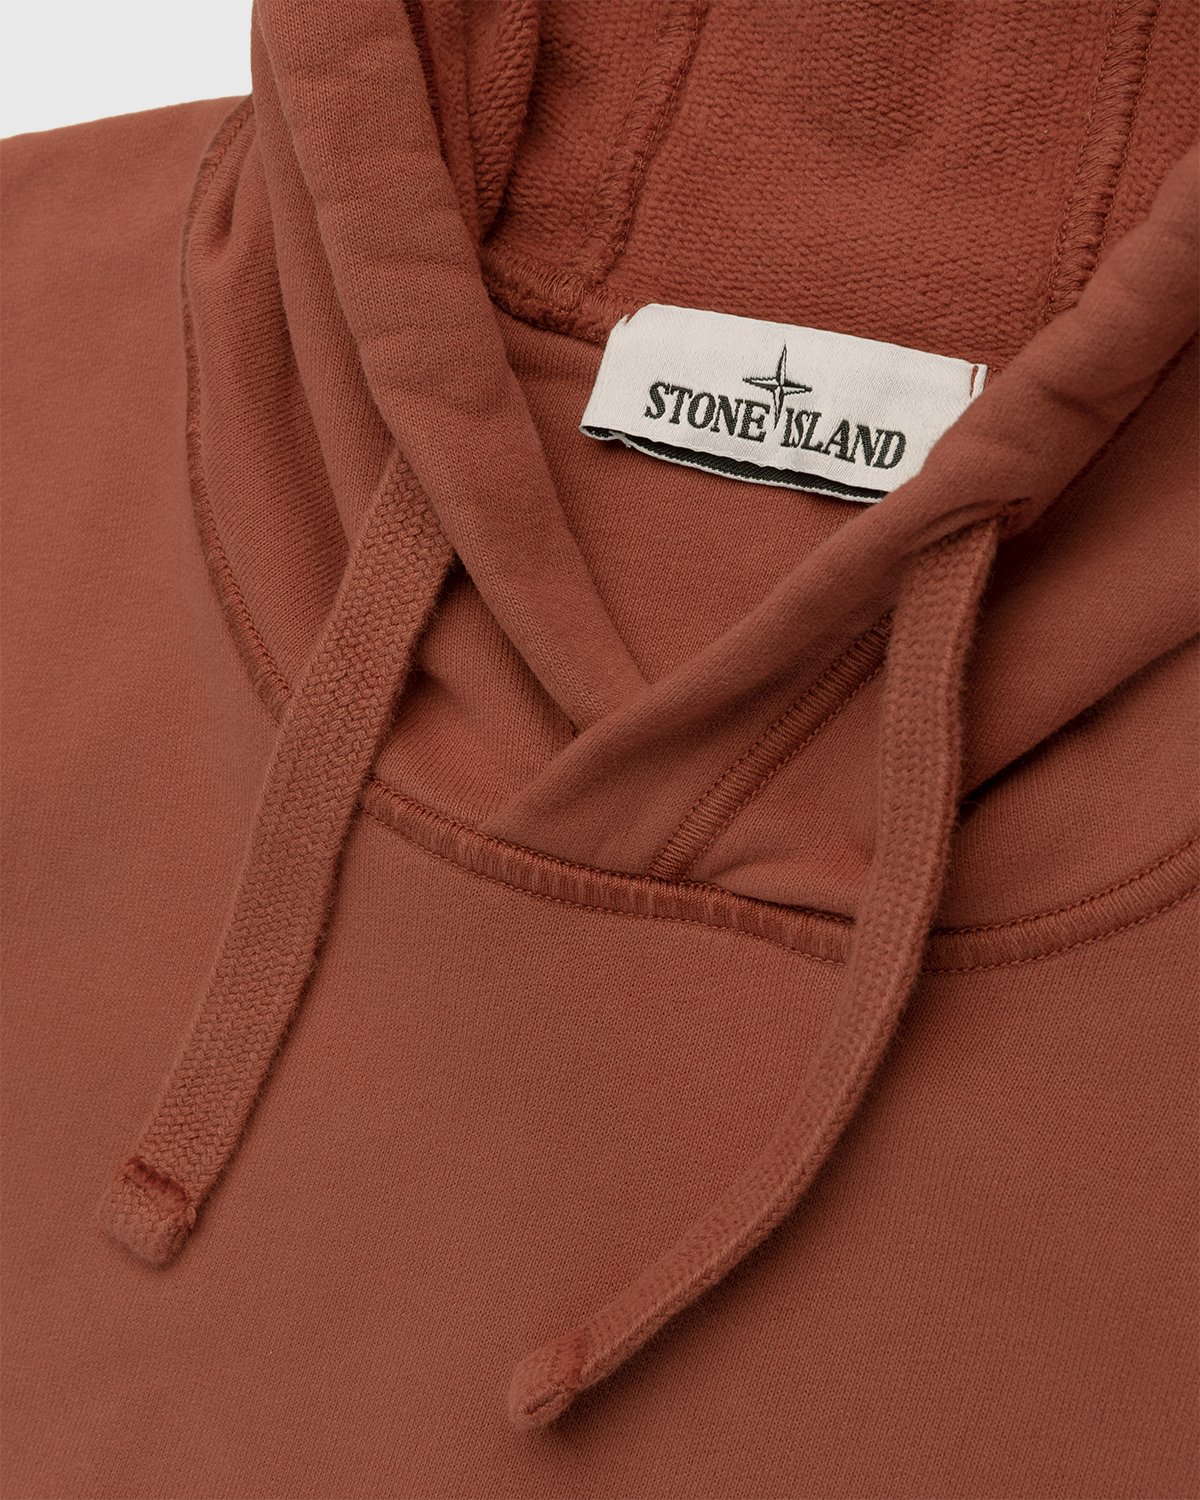 Stone Island - Dust Color Treatment Hoodie Brick Red - Clothing - Red - Image 3